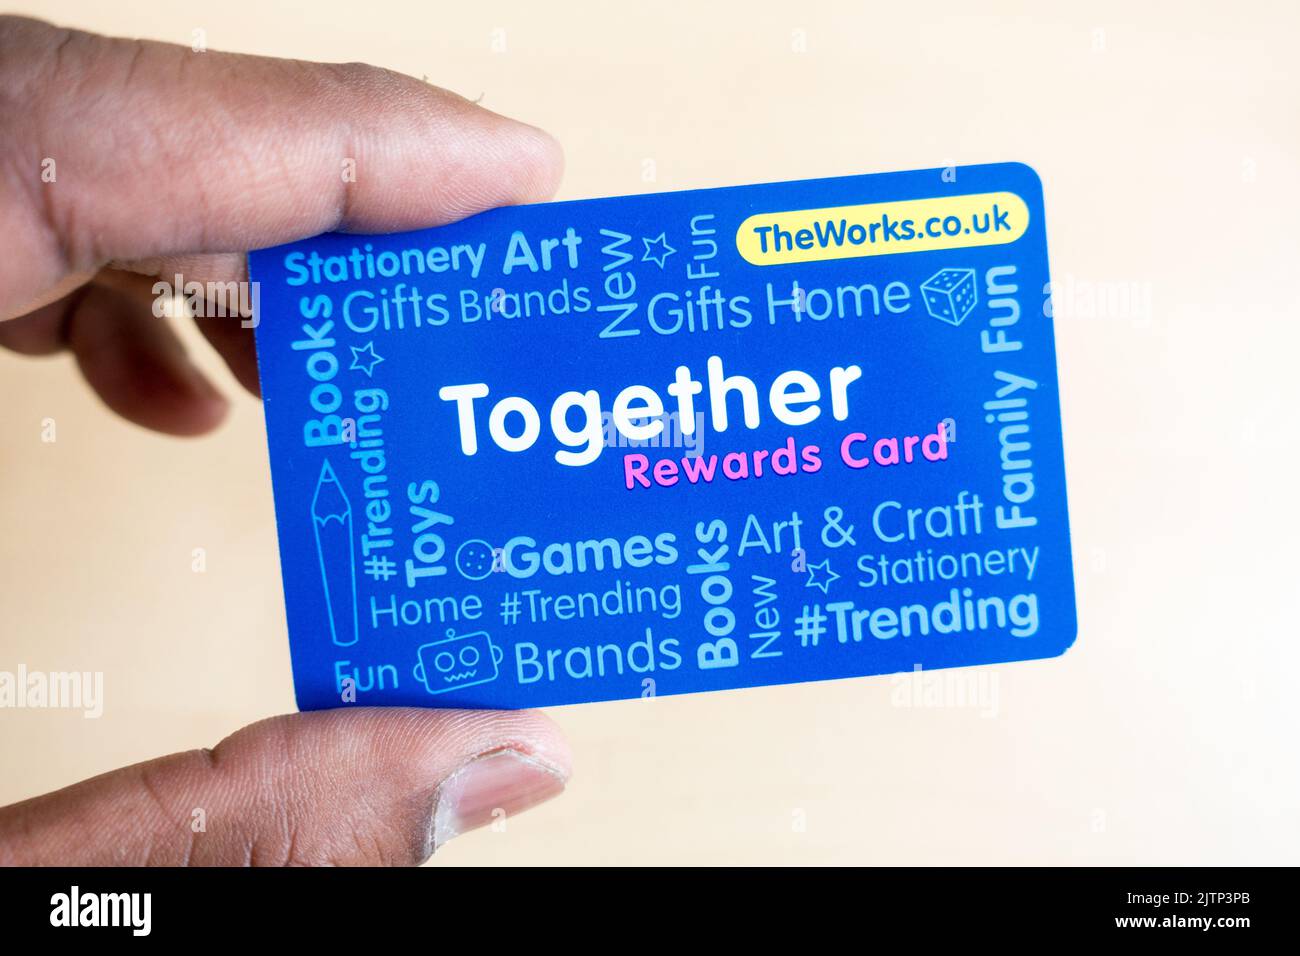 Adult male holding TheWorks stationary store reward card Stock Photo